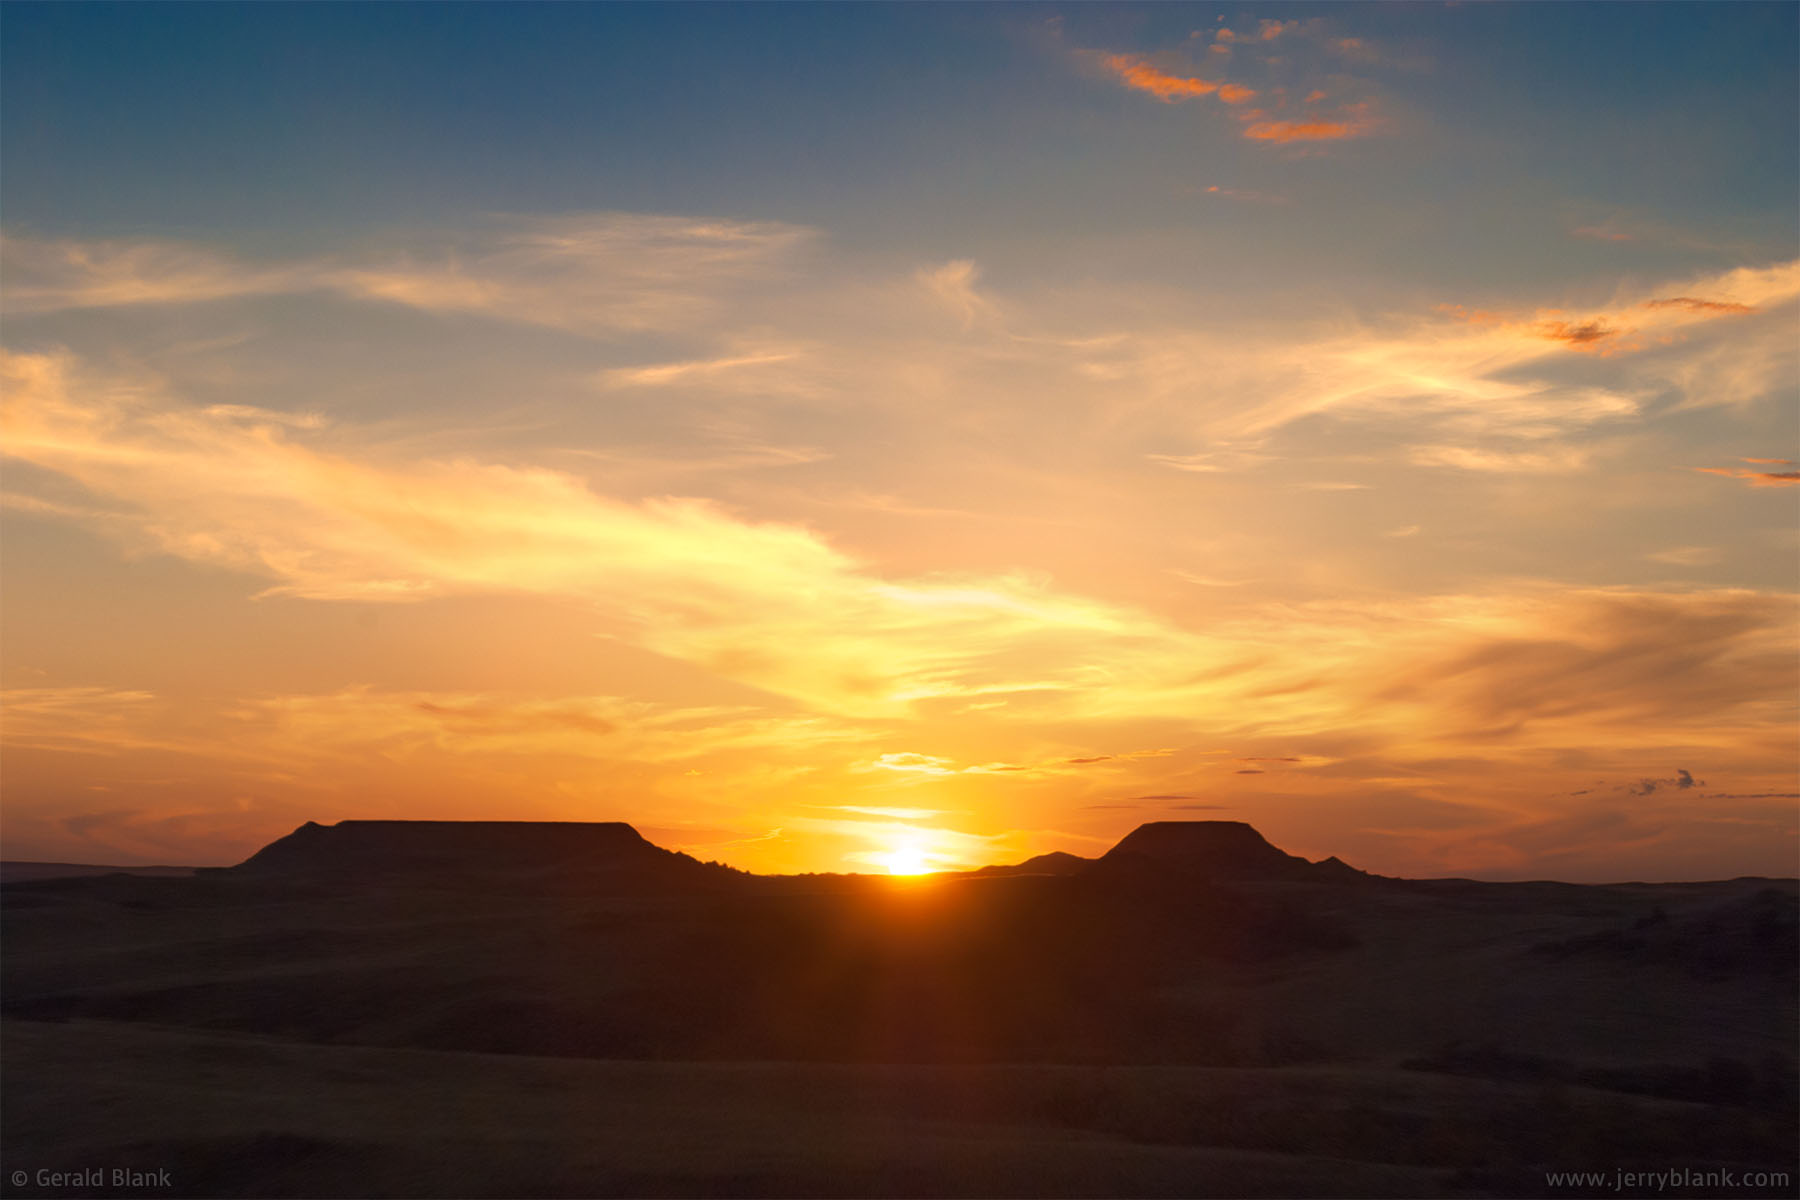 #02341 - Sunset at Squaretop Buttes and Goat Pass, in the Little Missouri National Grassland, Billings County, North Dakota - photo by Jerry Blank